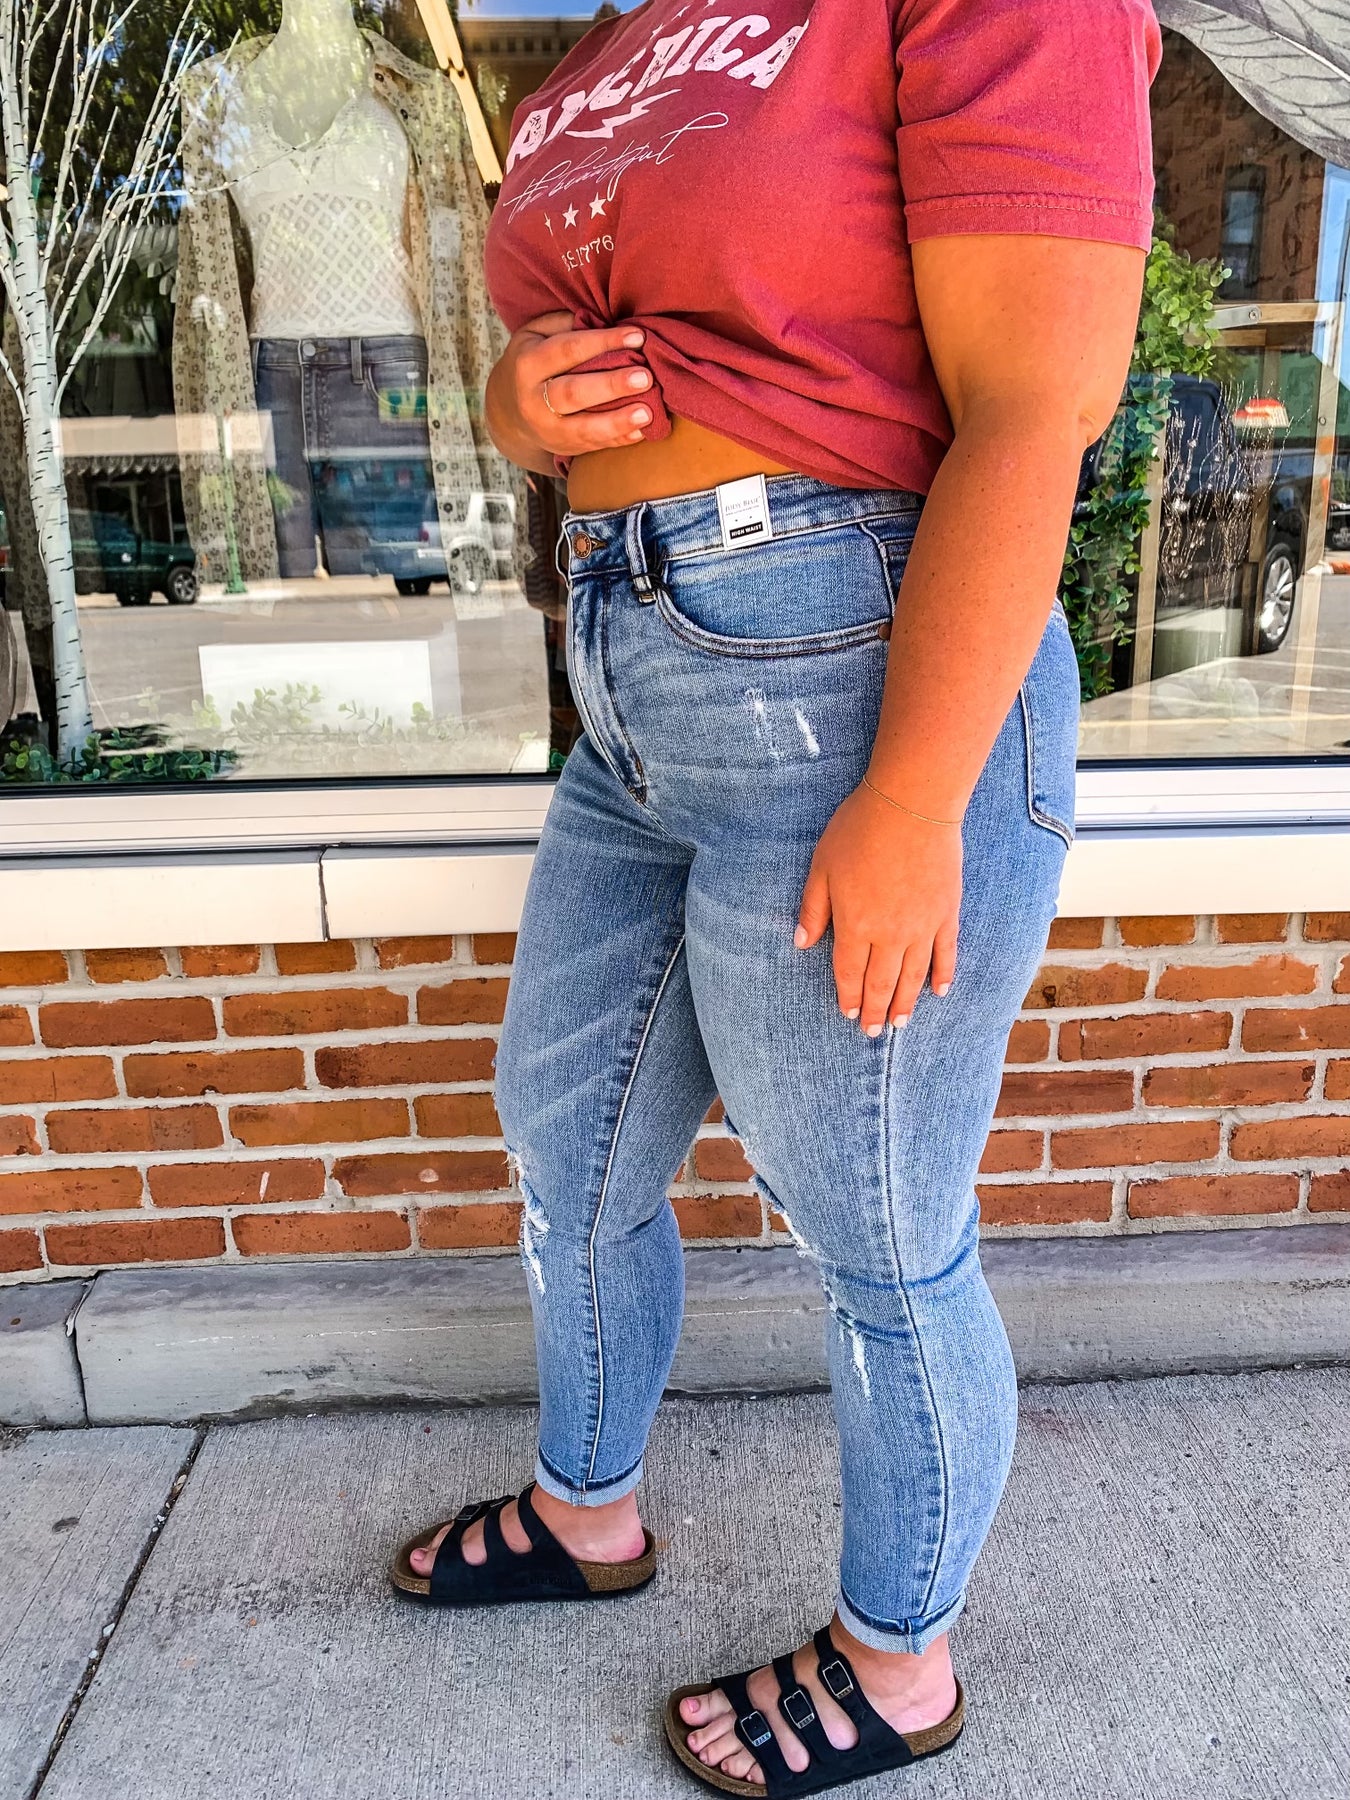 Judy blue jeans review! Im wearing a 14w and am usually a size 16